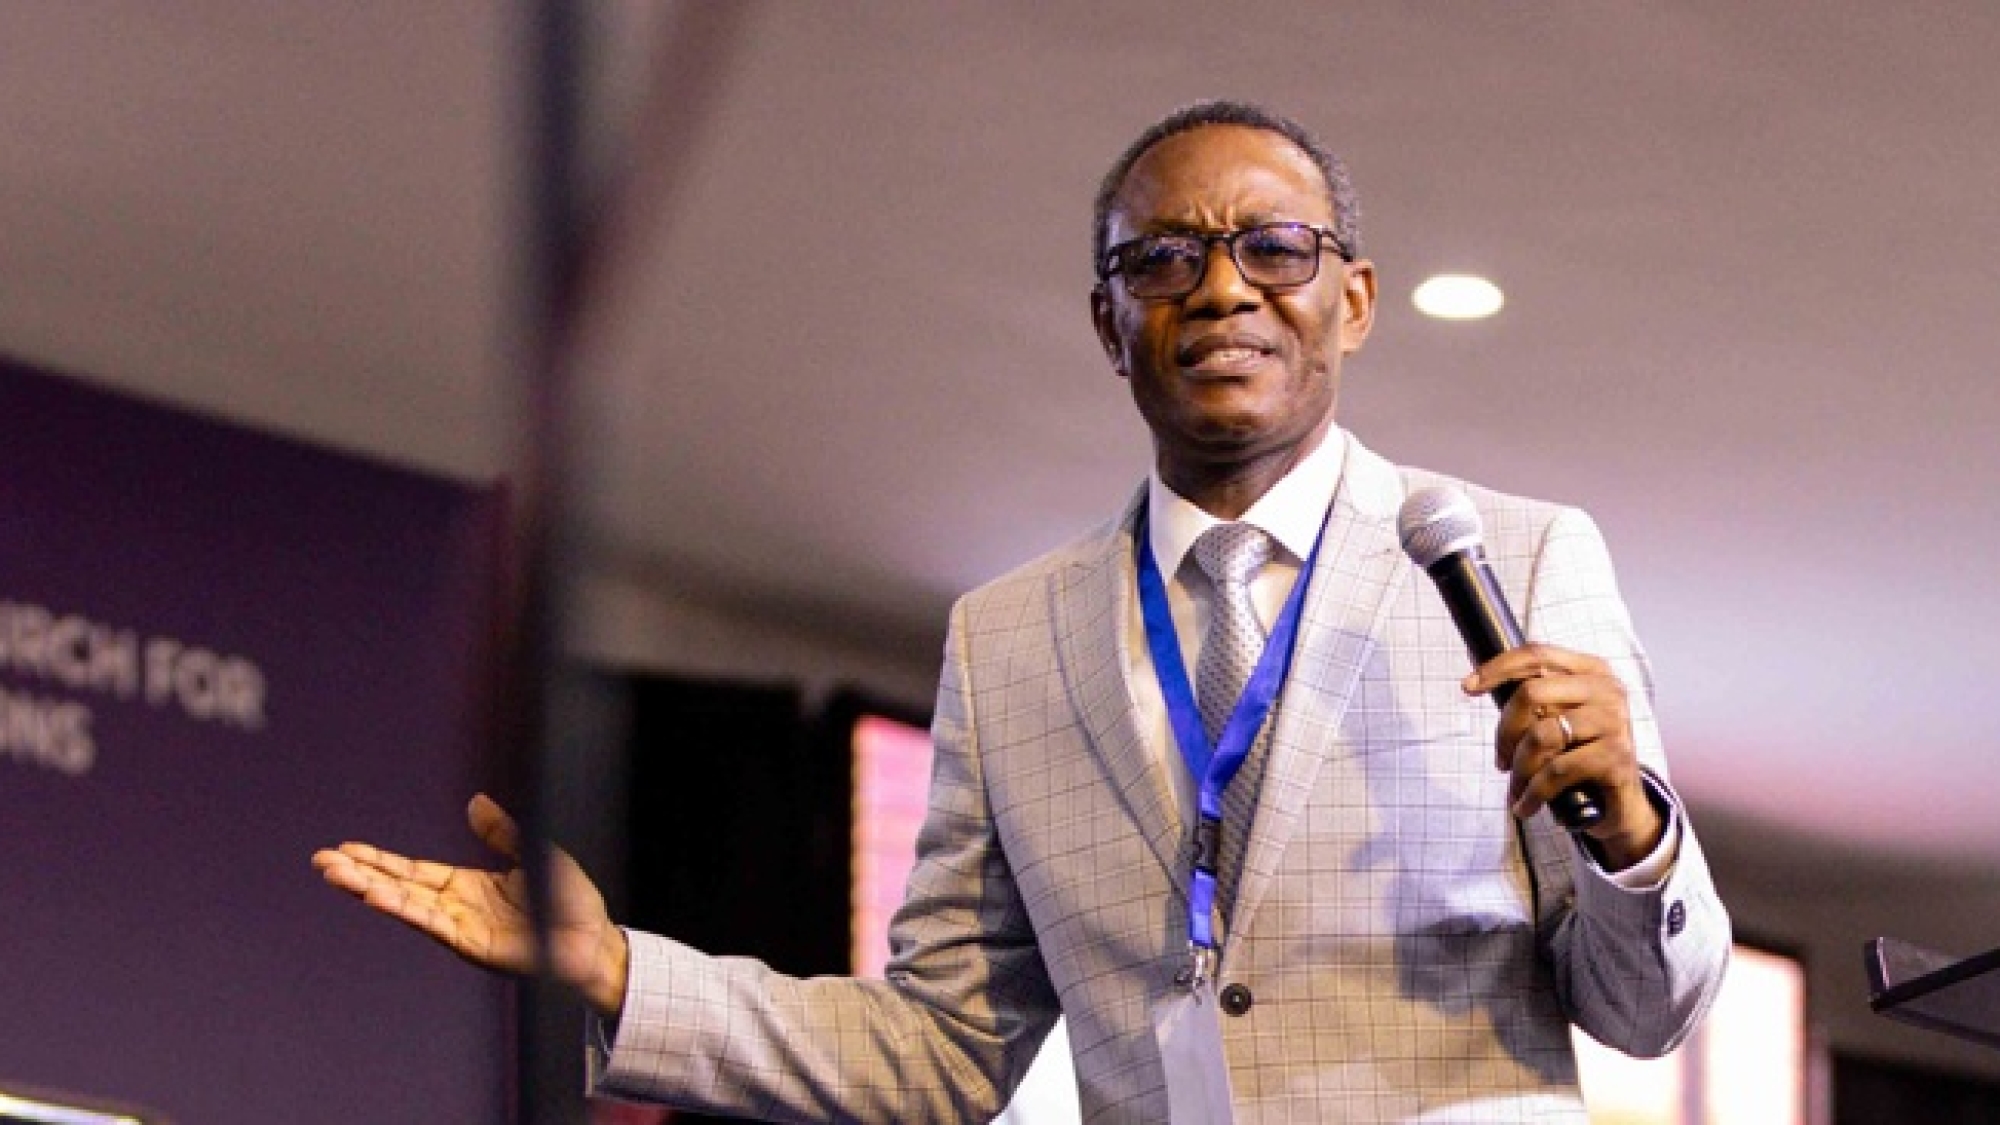 Make Time To Address Grievances Of The Youth – General Secretary Tells Church Leaders